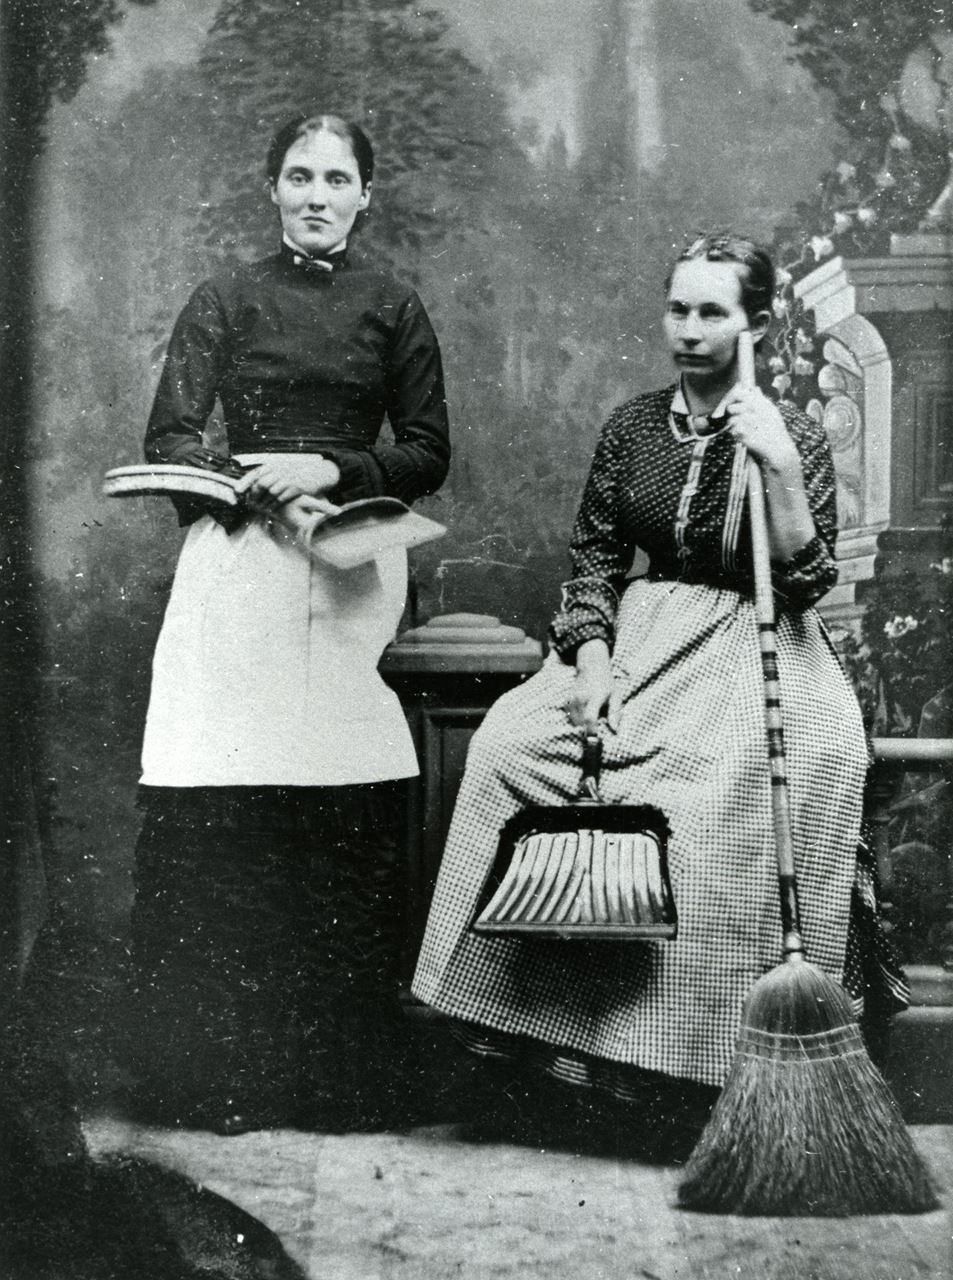 A rectangular image of two women sitting. The one to the left holds a dustpan and the one on the right holds a broom and dustpan.